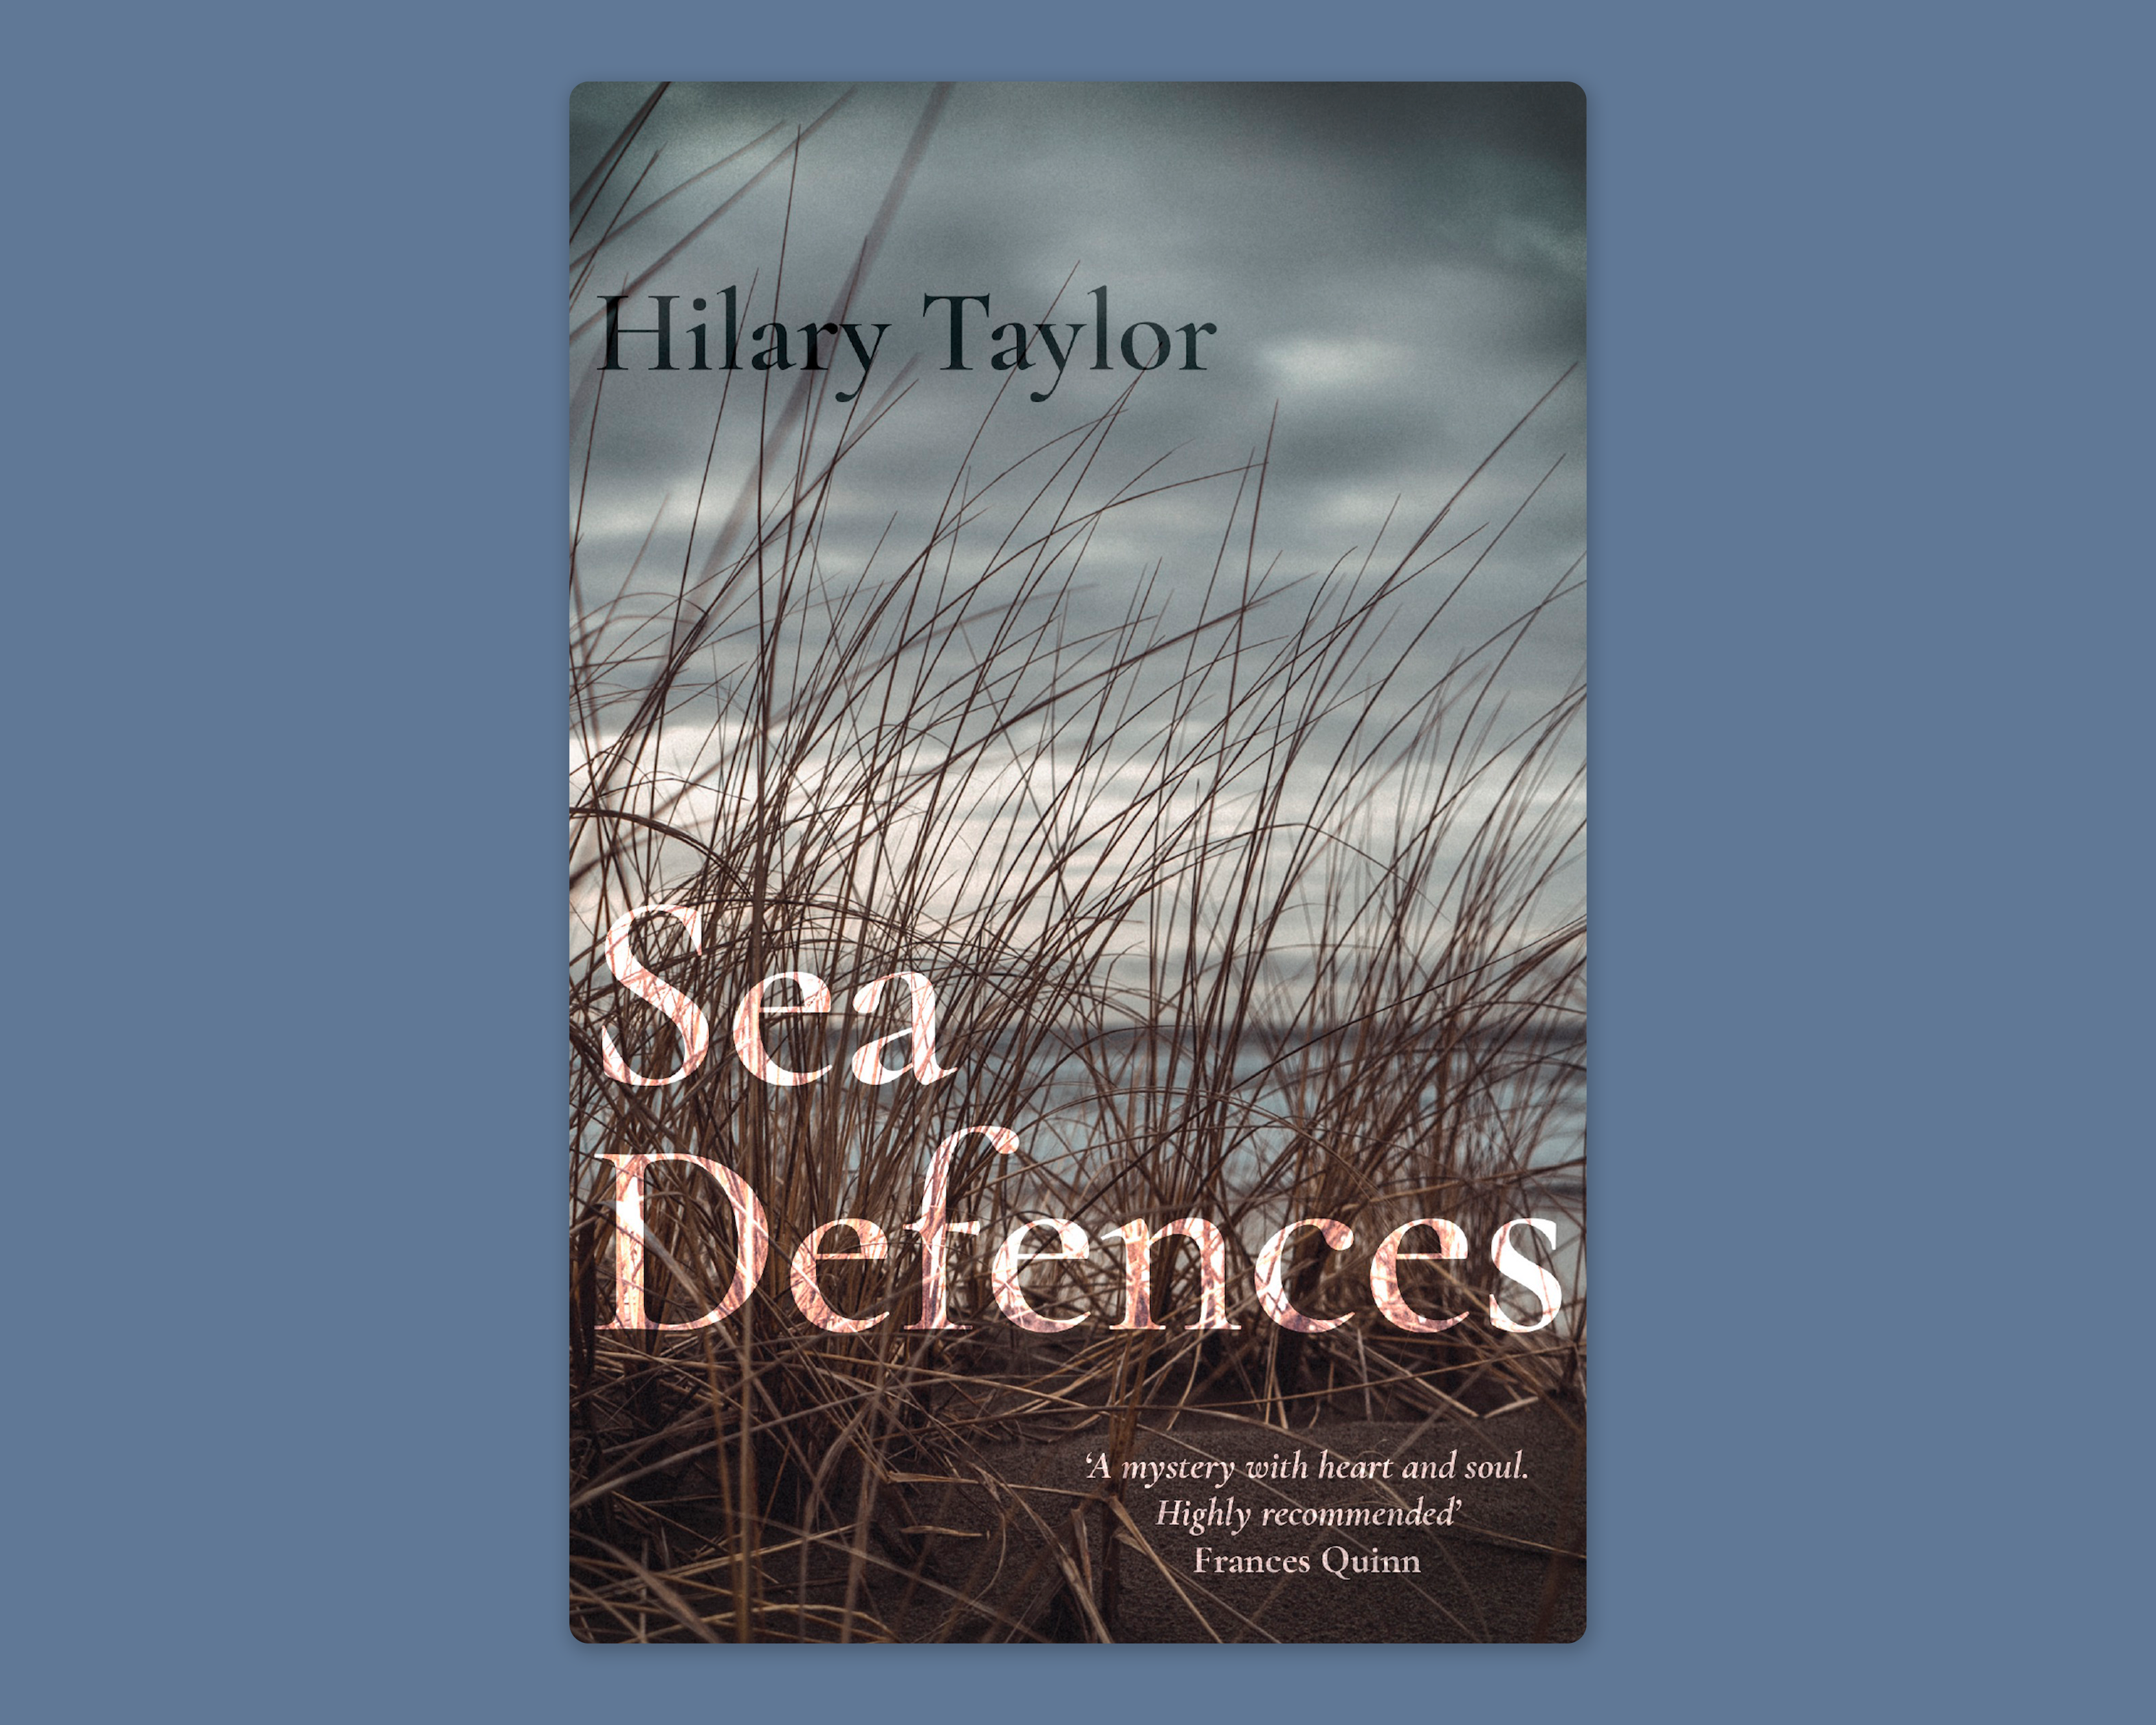 An image of the book cover for Sea Defences by Hilary Taylor. The book cover is on a blue background.